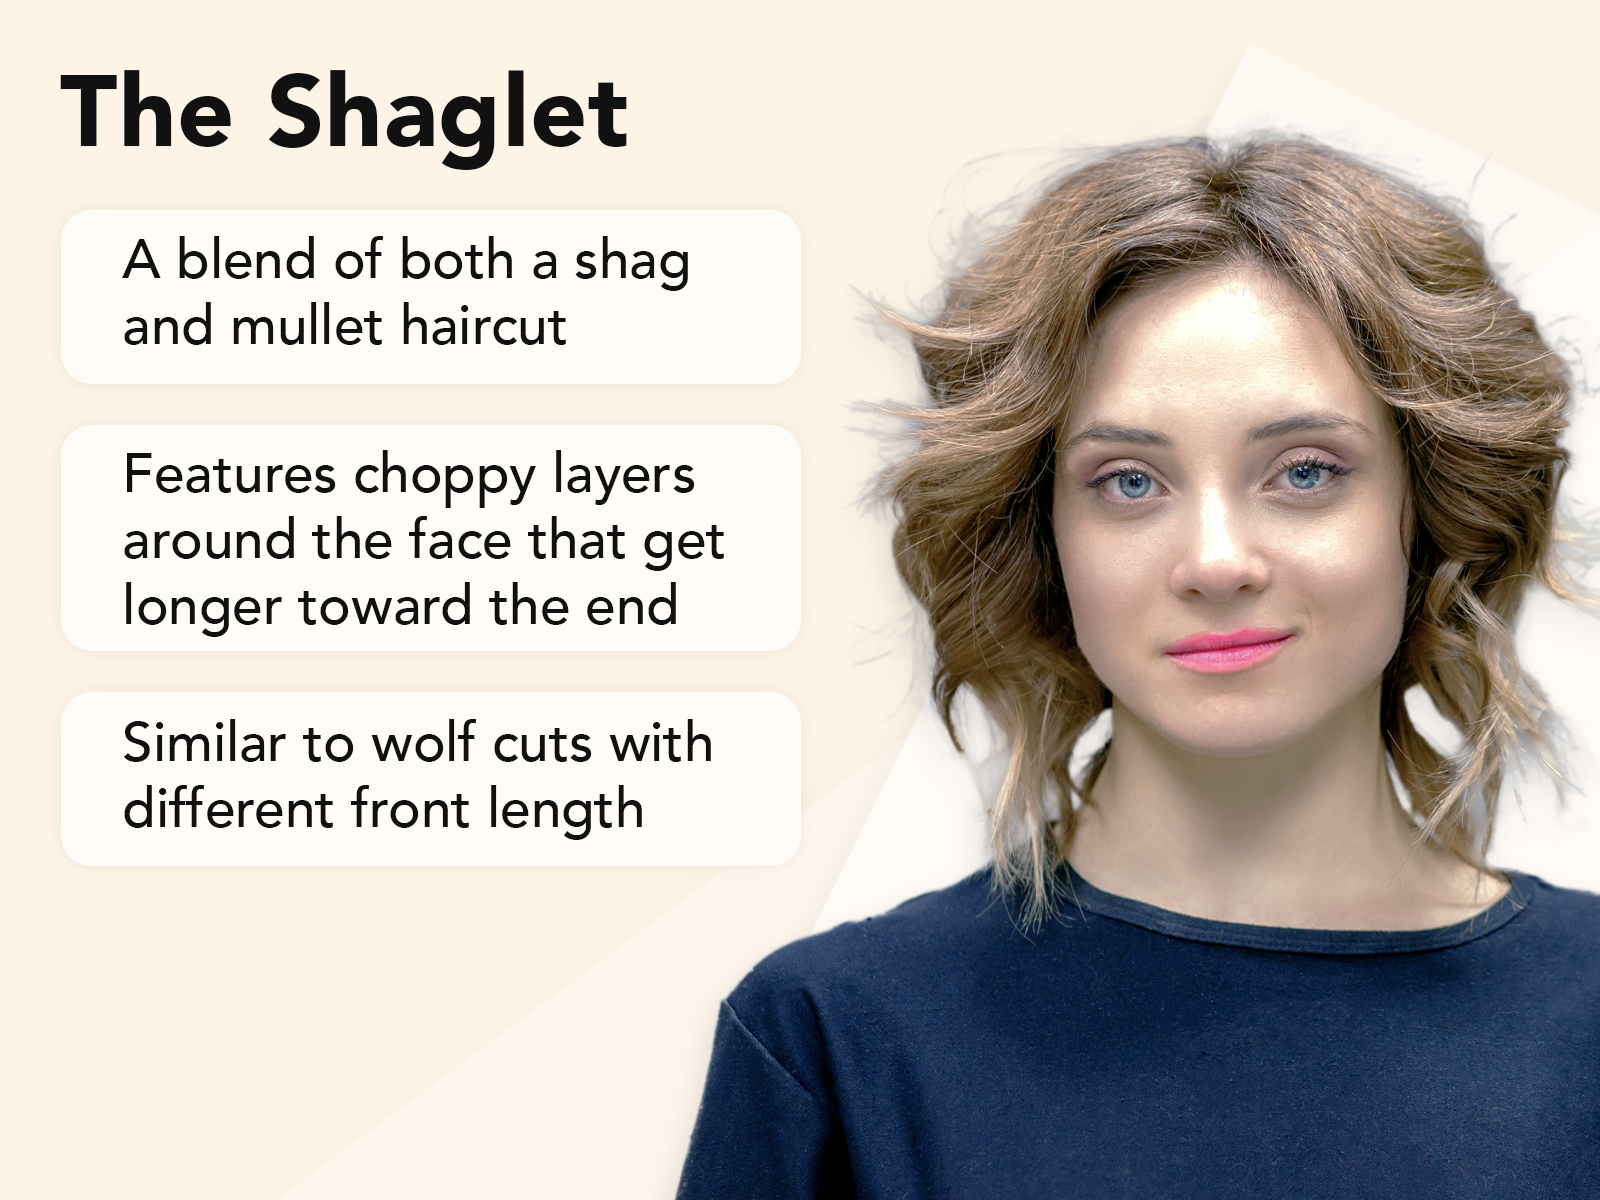 What Is a Shaglet explainer image on a tan background